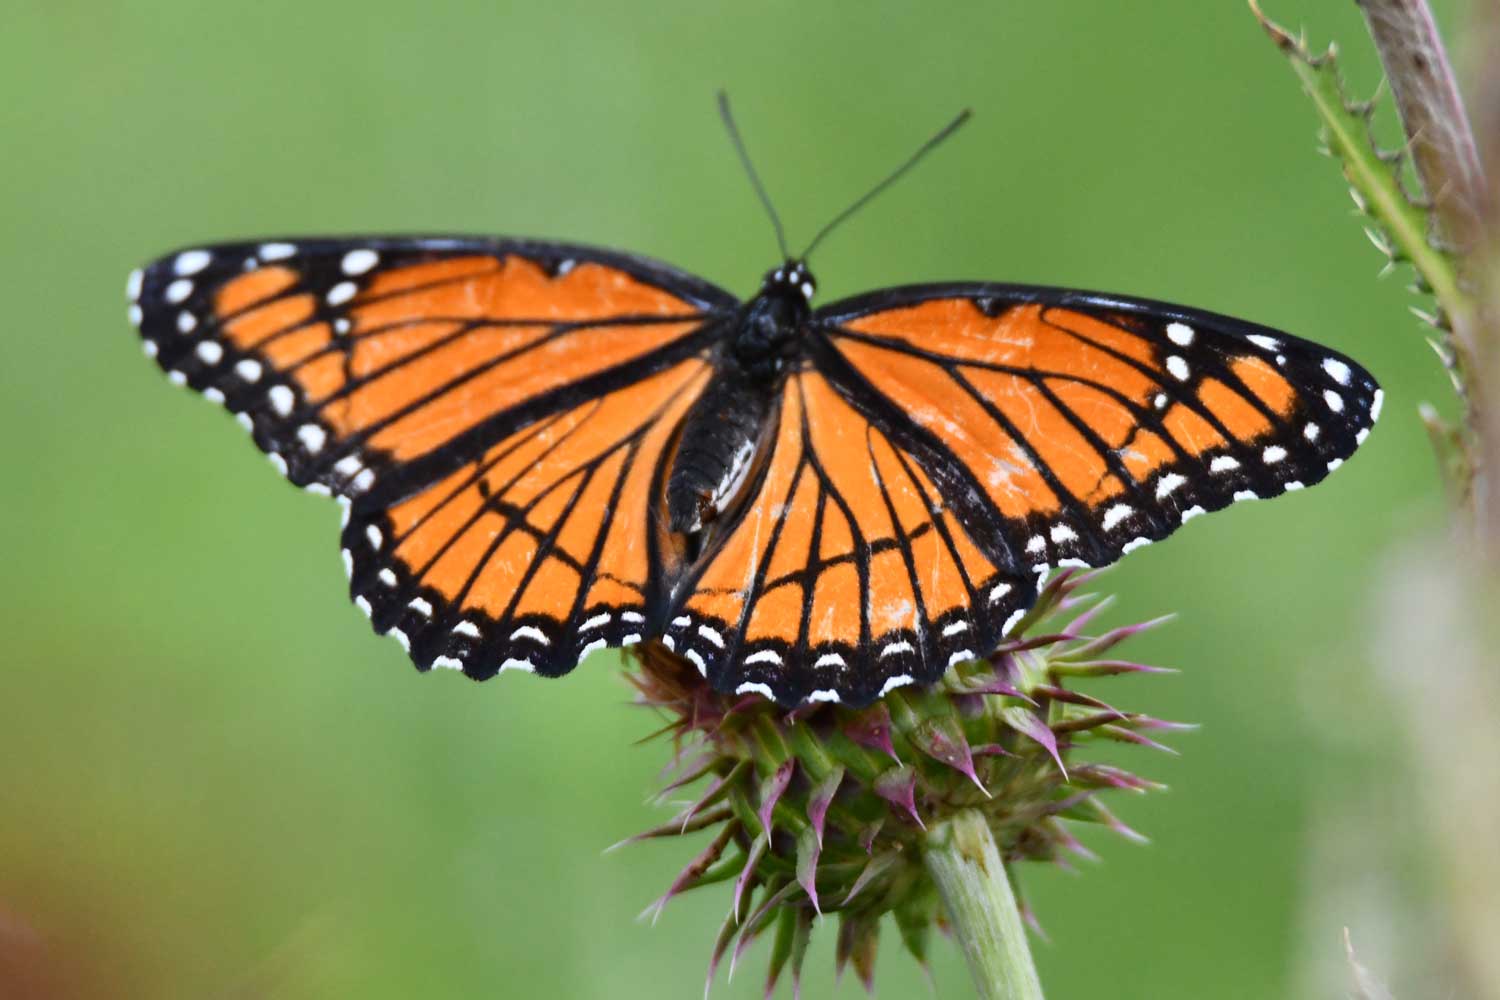 Viceroy butterfly sitting on a flower bloom.